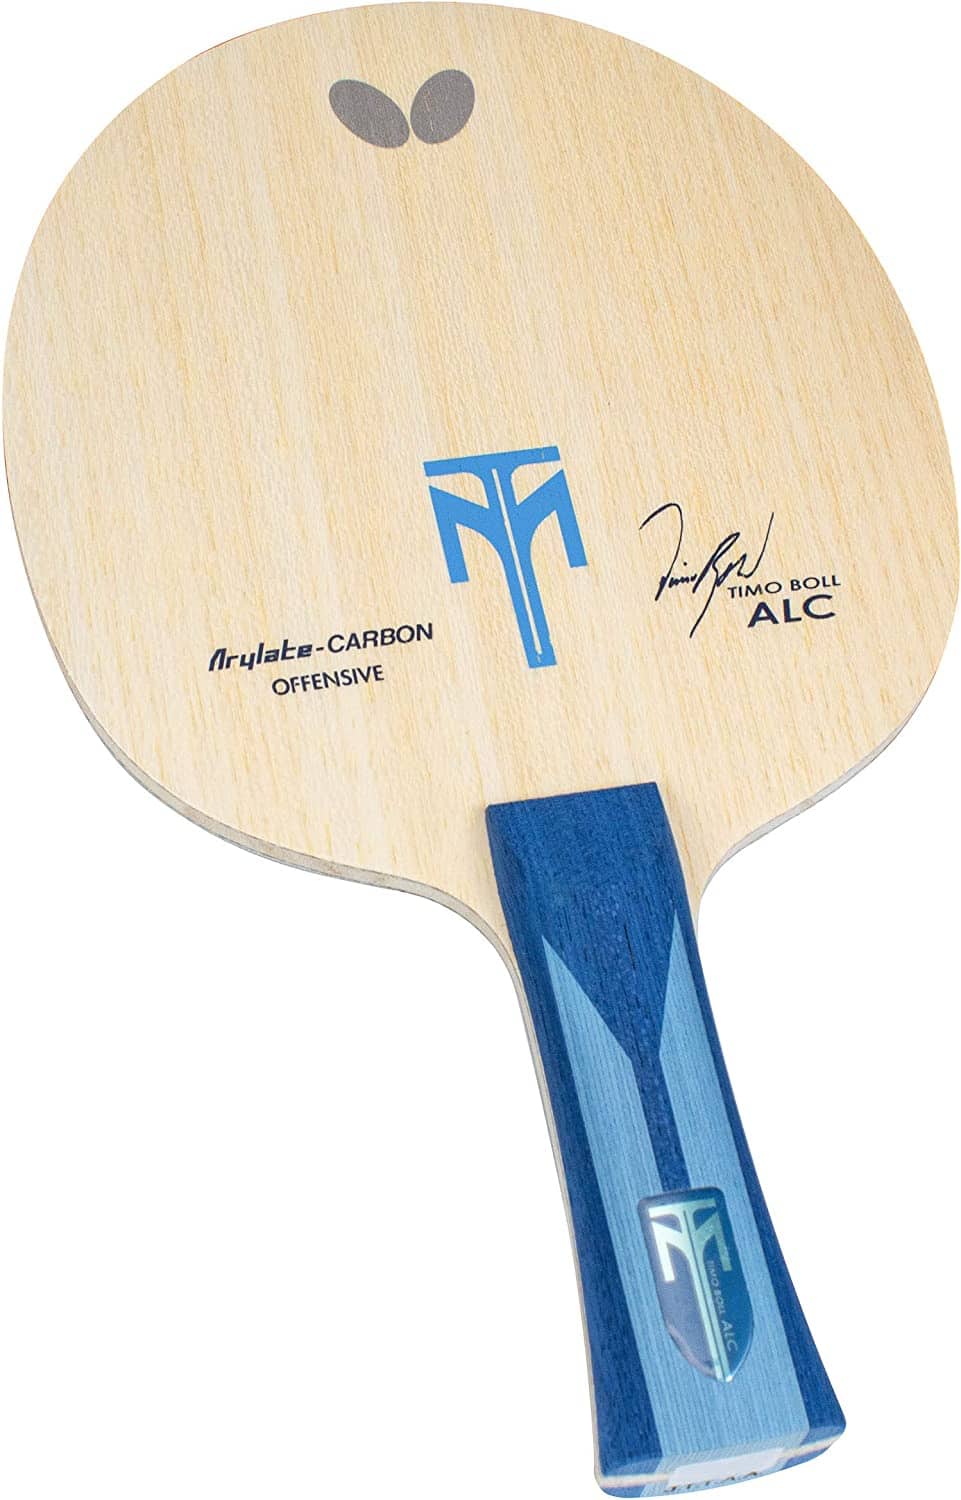 butterfly blades timo boll alc